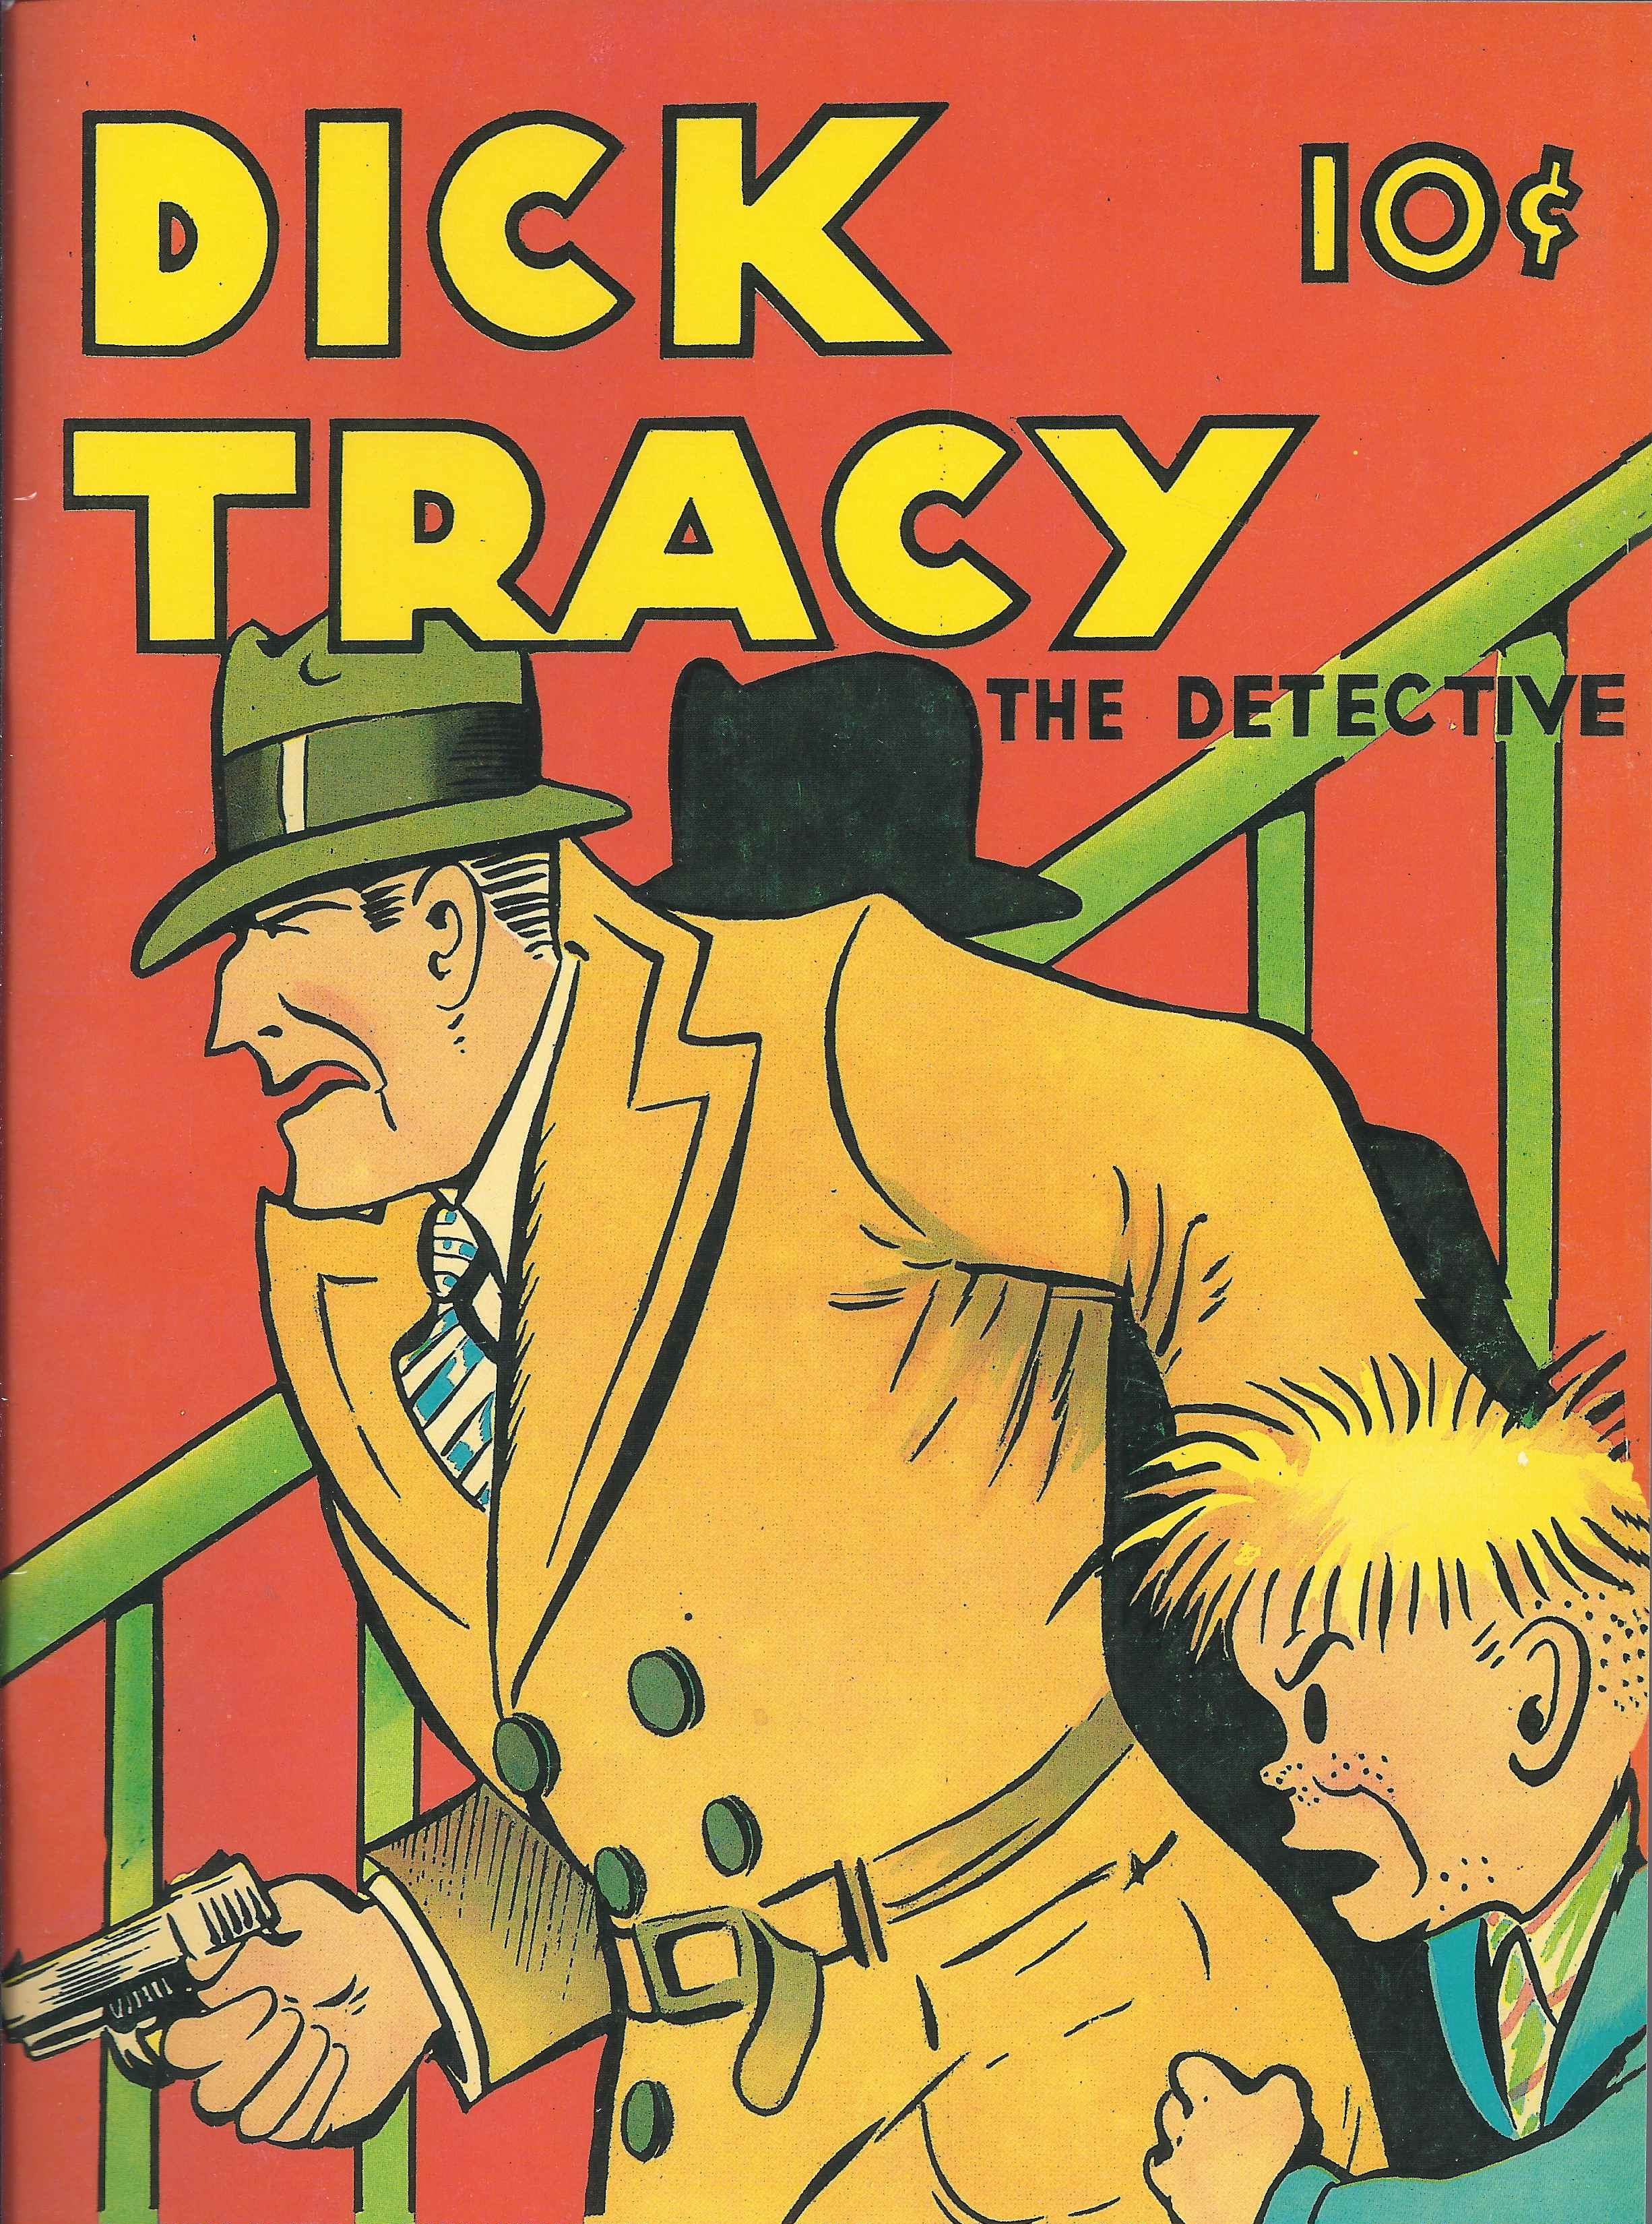 Dick tracy cartoon pictures